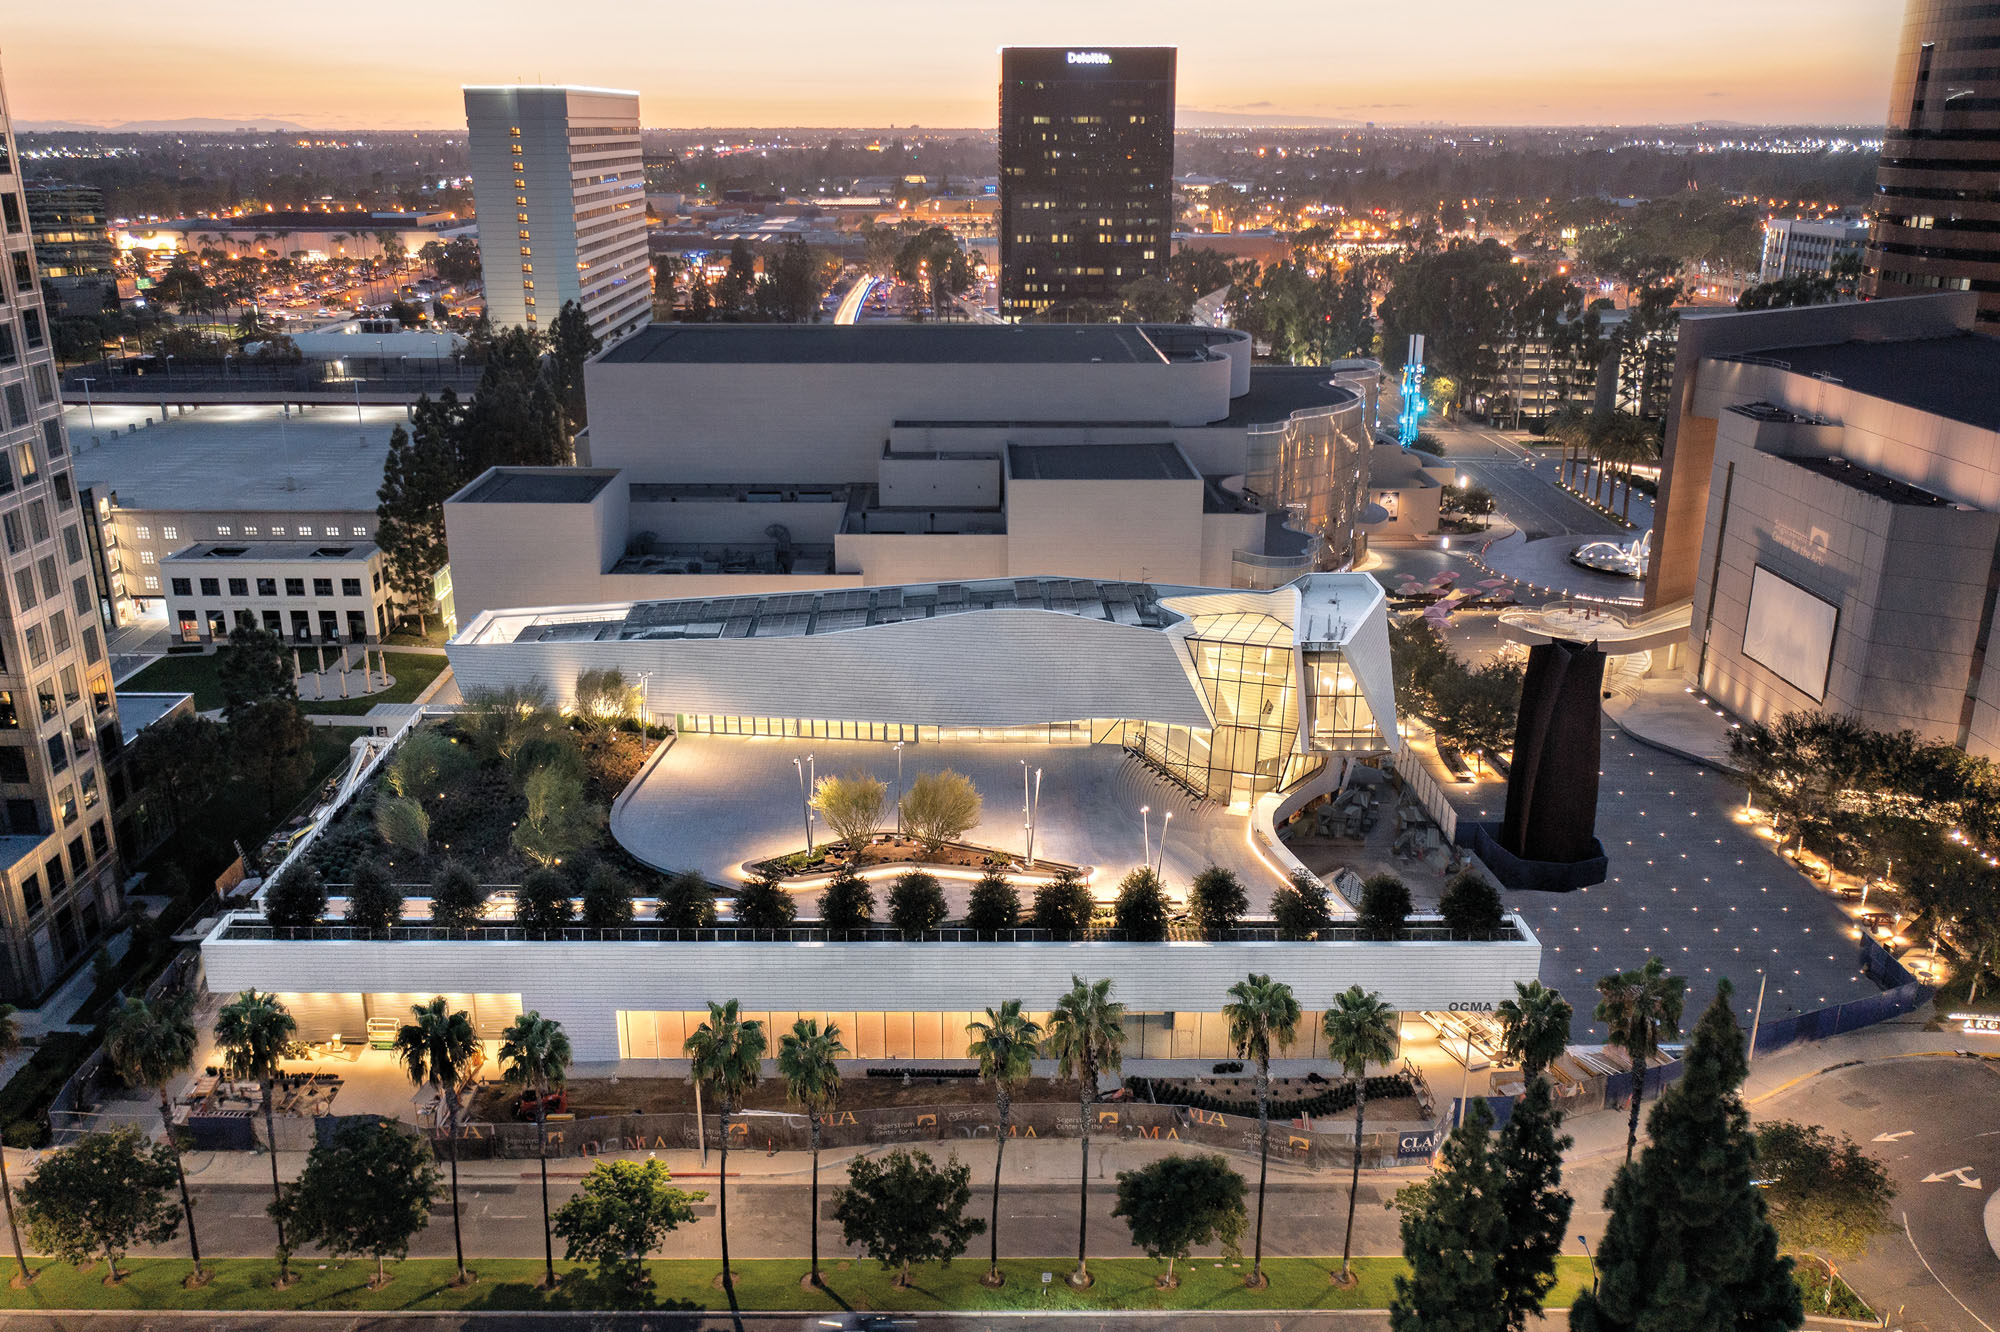 An aerial photograph of the Orange County Museum of Art in the evening shows roof garden and white facade.